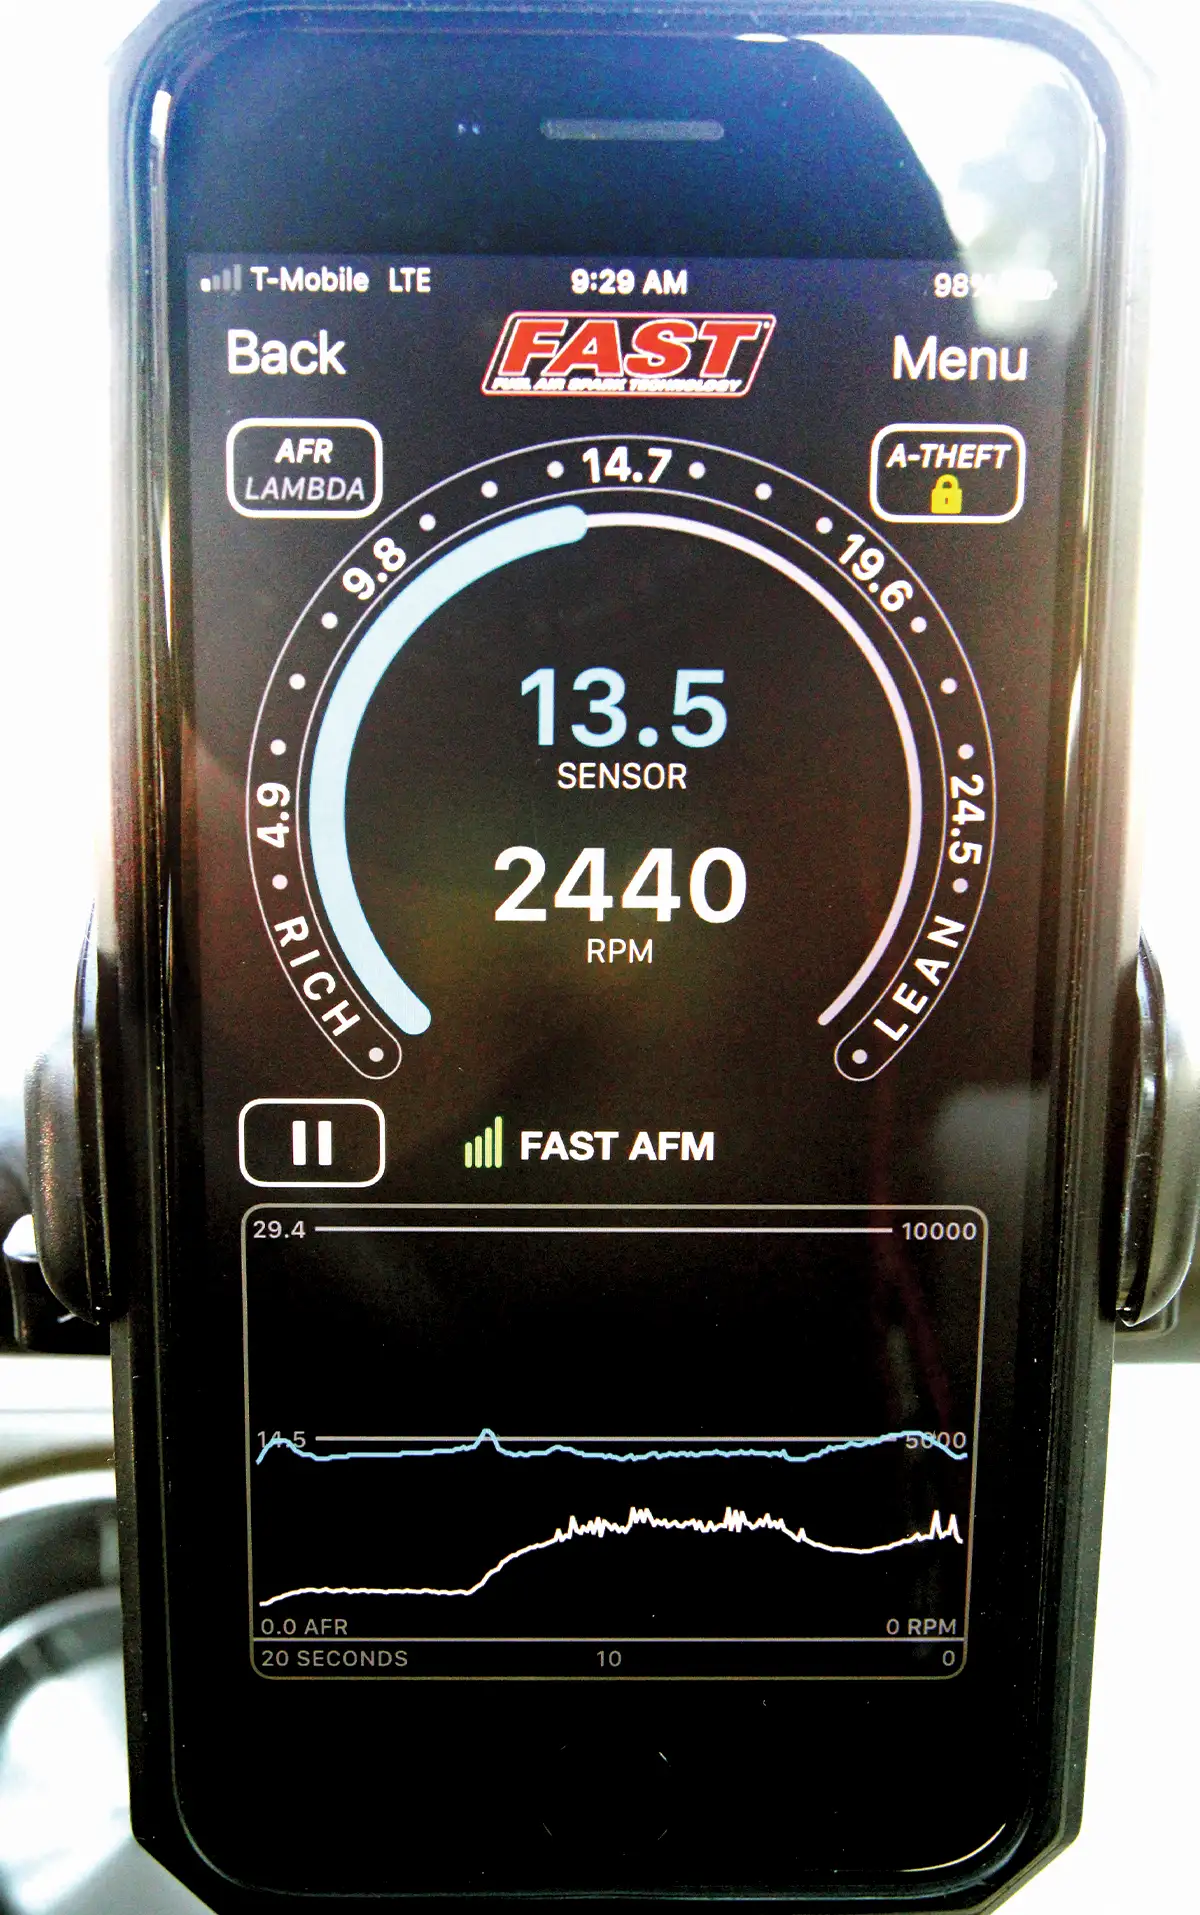 phone screen showing the sensor and RPM levels from FAST's Slick New Air/Fuel Ratio Wireless Meter app